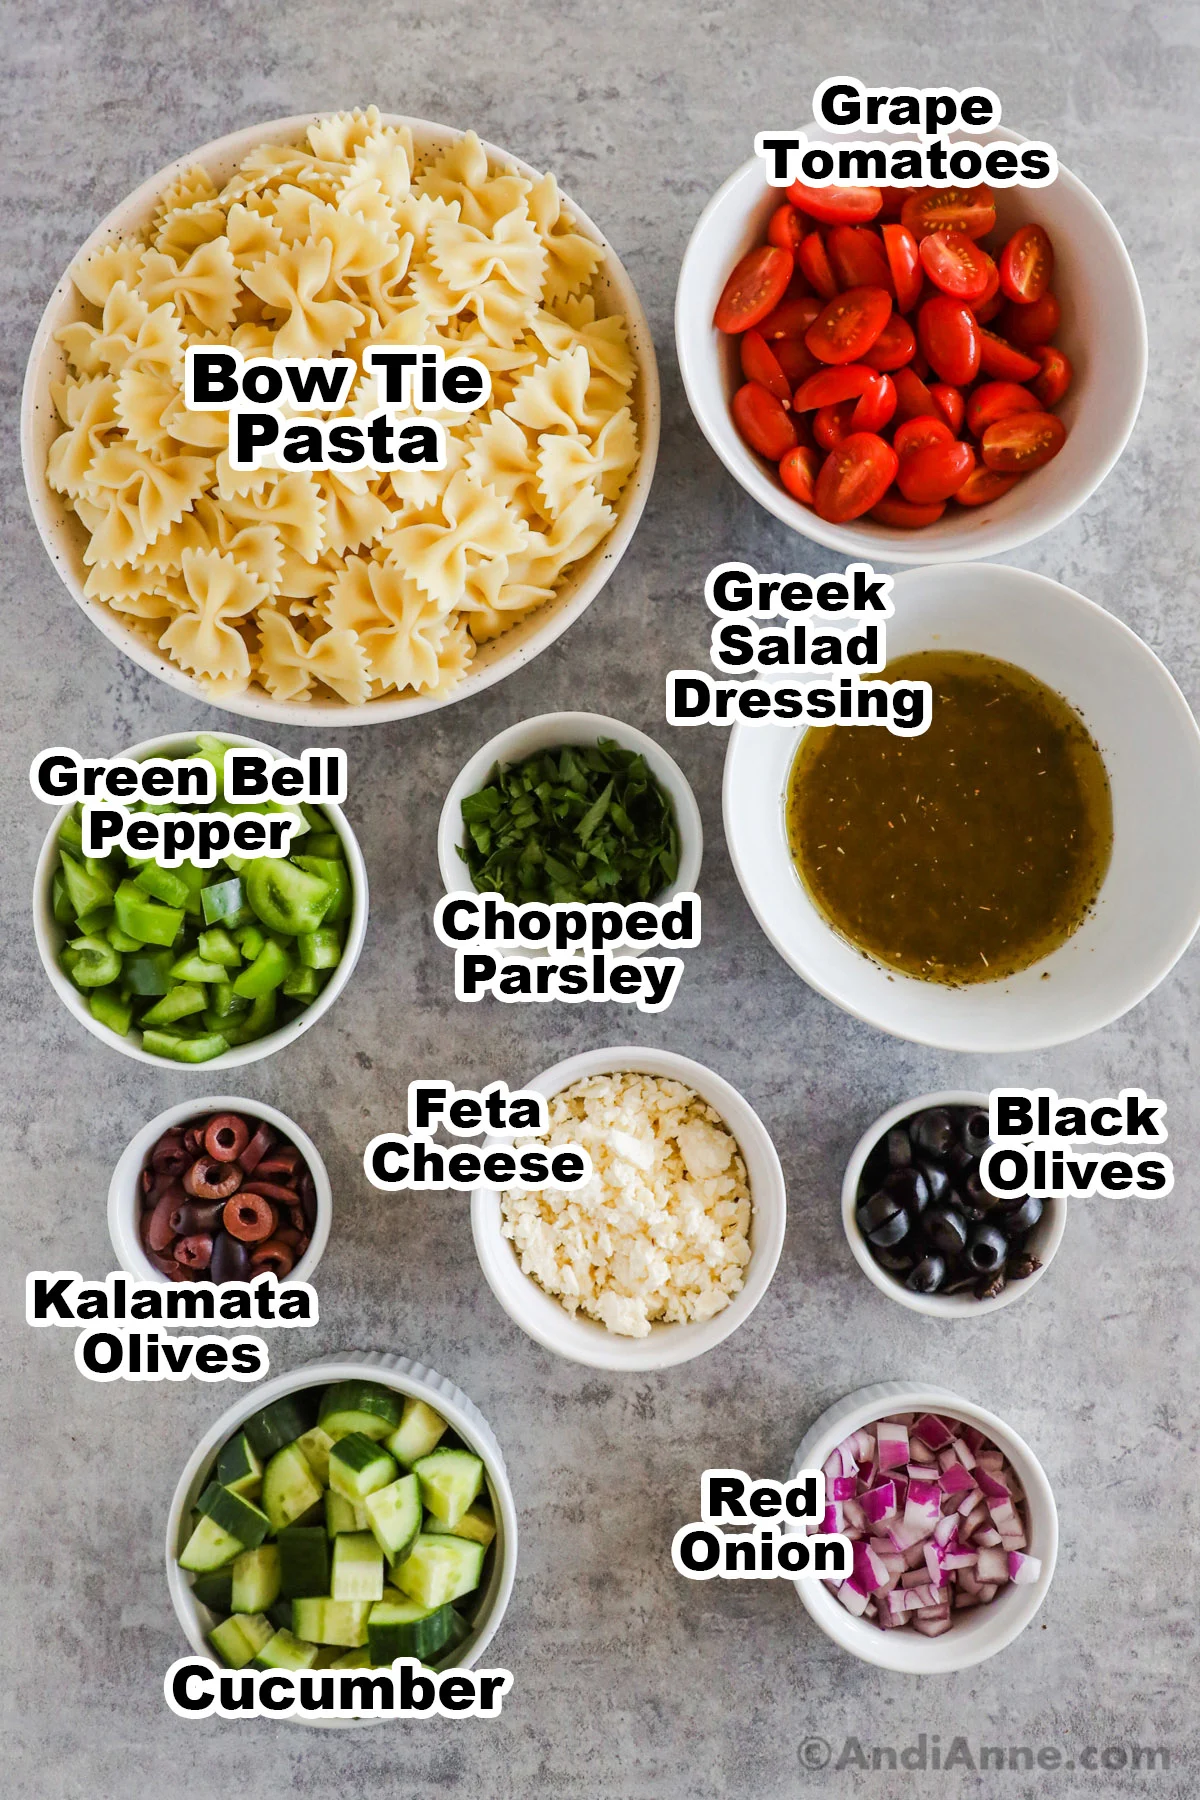 Recipe ingredients in bowls including bowl of farfalle pasta, sliced grape tomatoes, greek salad dressing, chopped parsley, green bell pepper, feta cheese, black olives, kalamata olives, cucumber and red onion.